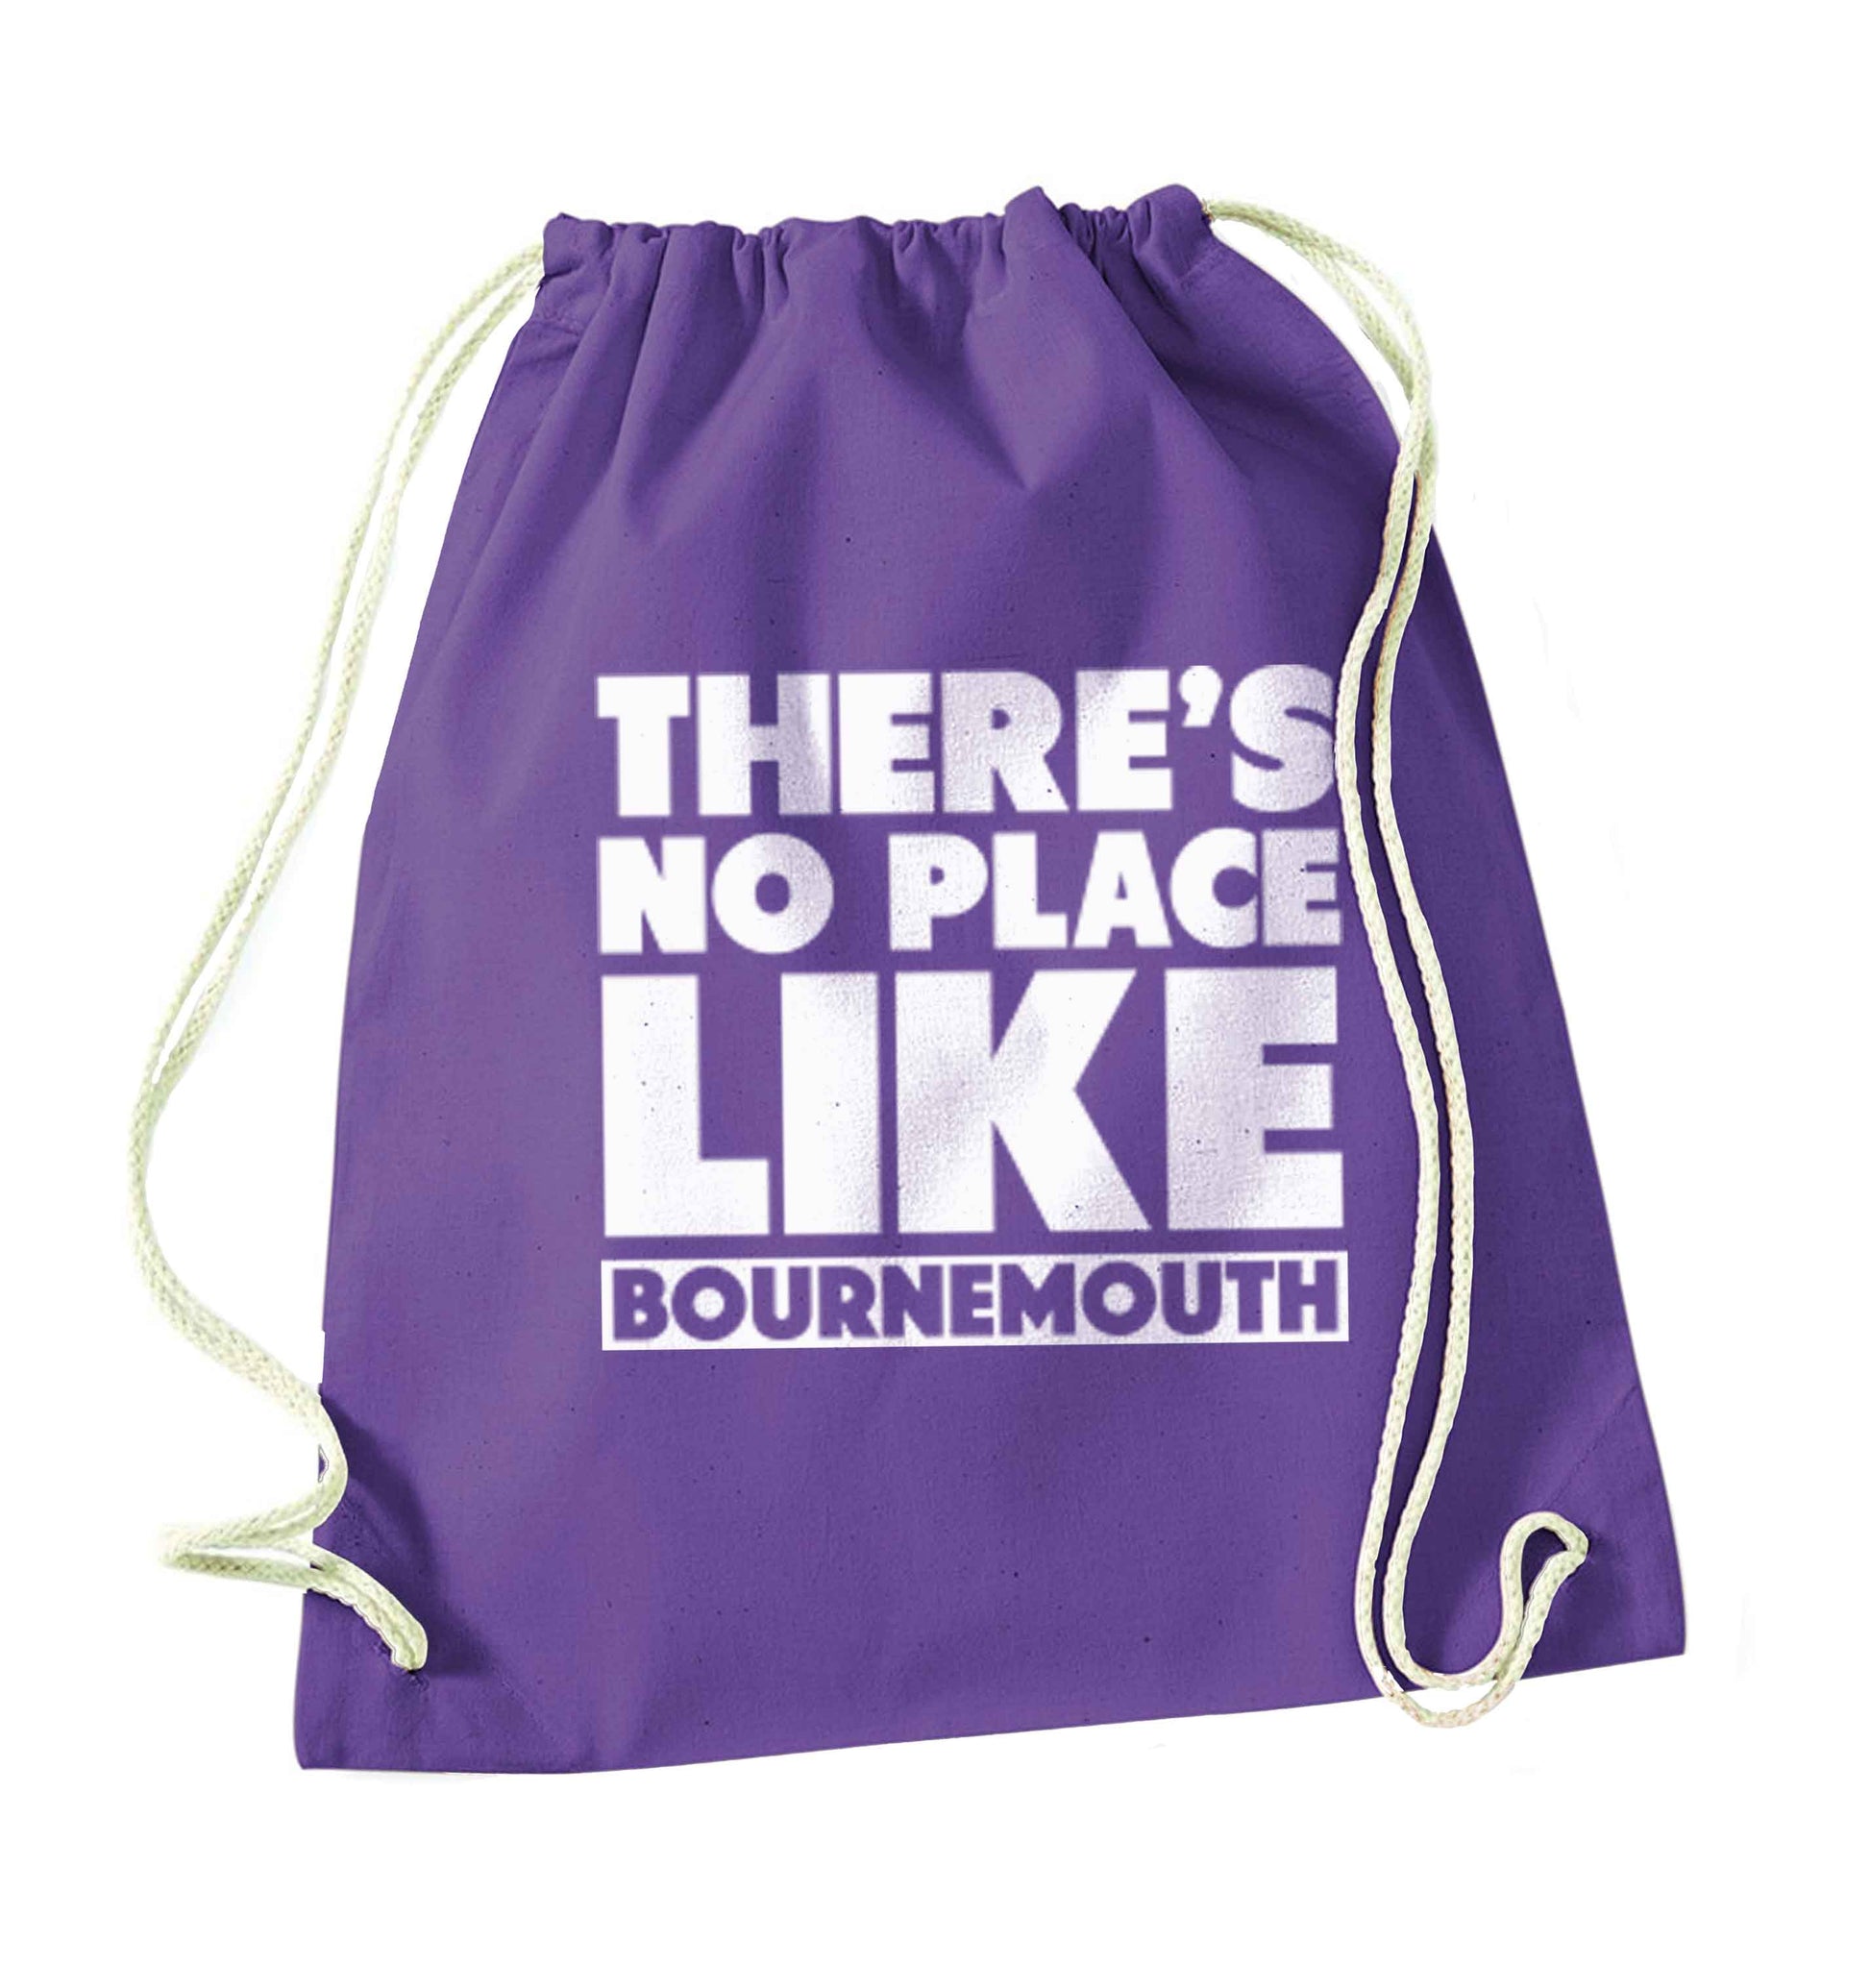 There's no place like Bournemouth purple drawstring bag